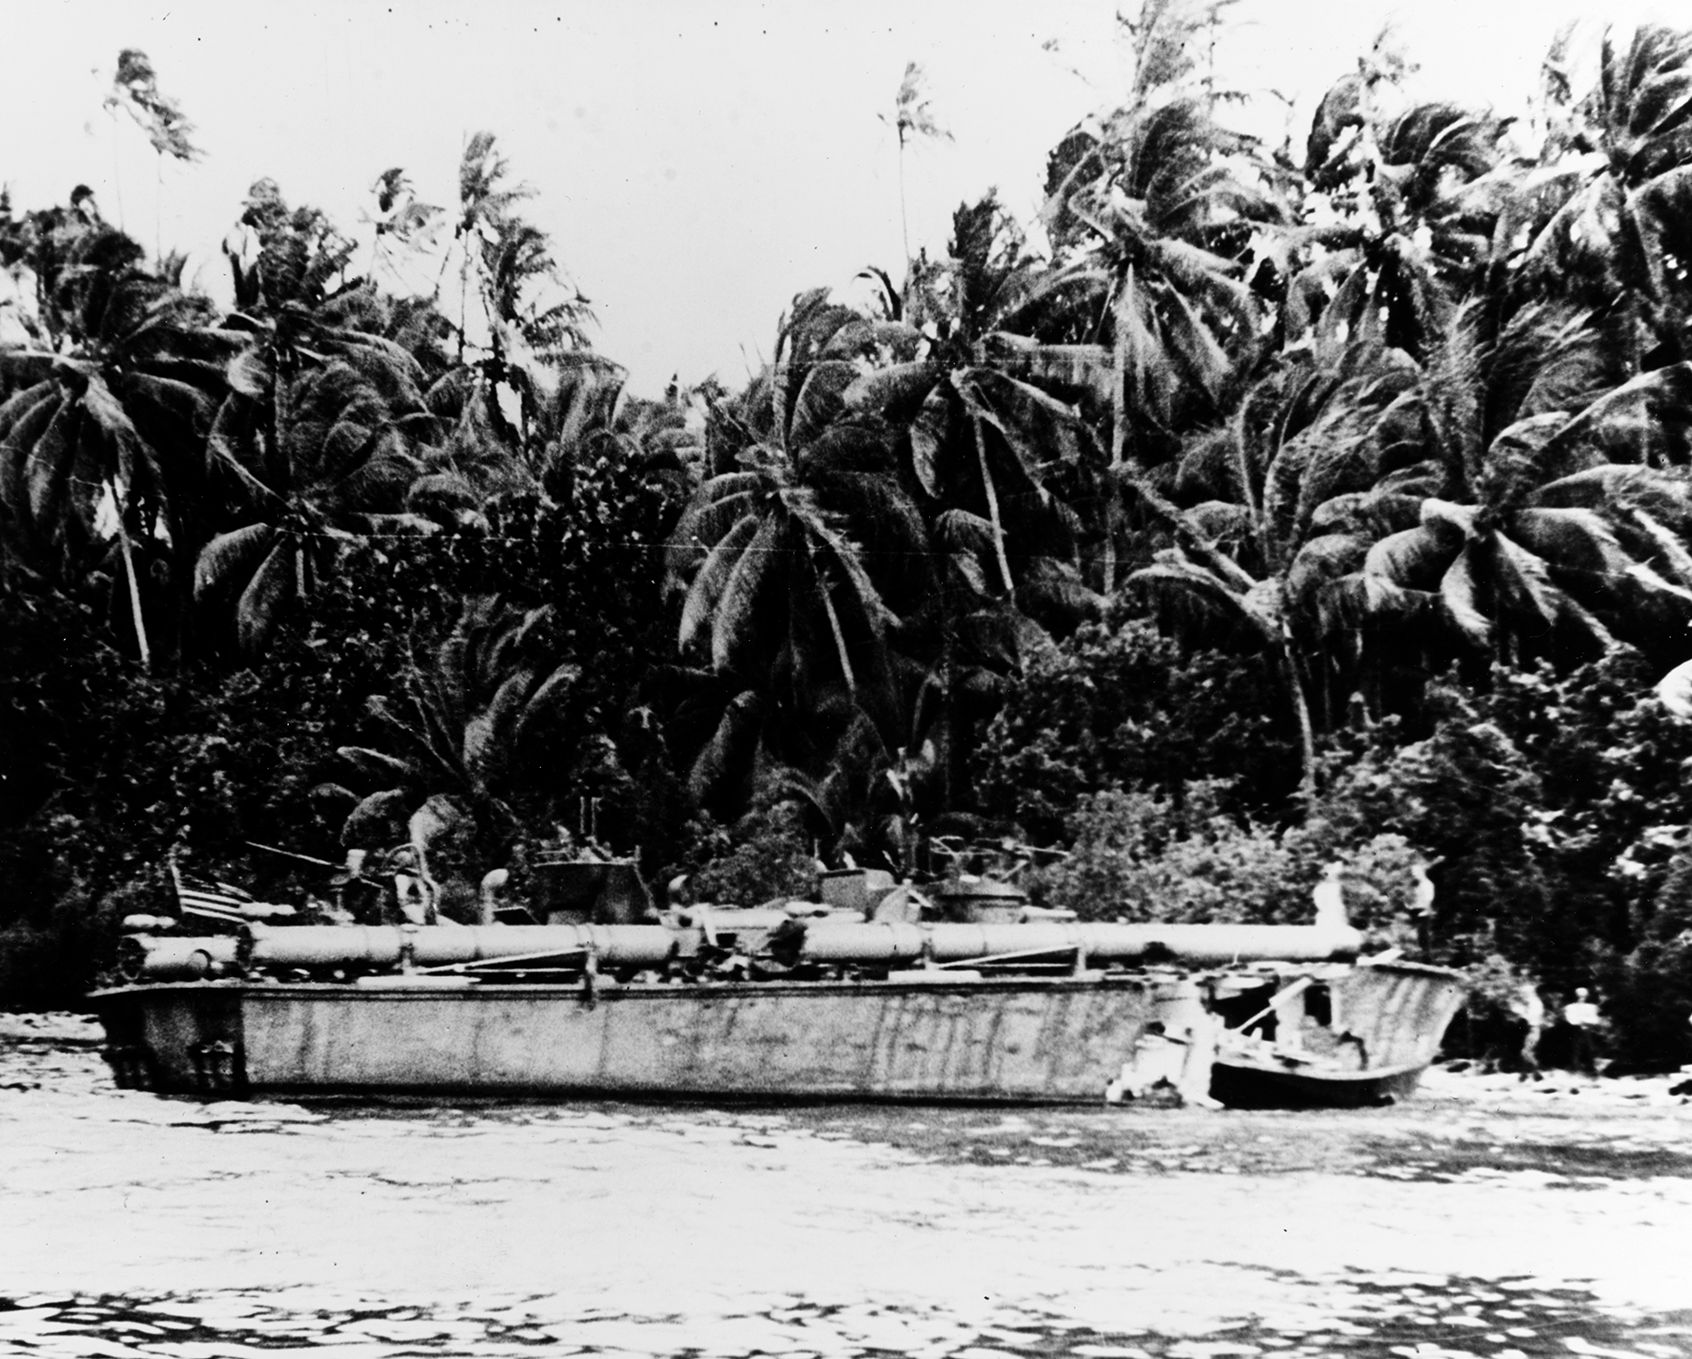  With a gaping hole in her bow after a Japanese air raid, PT-117 lies beached at Rendova on August 1, 1943. PT-boats saw heavy action during the campaign in the Solomon Islands.